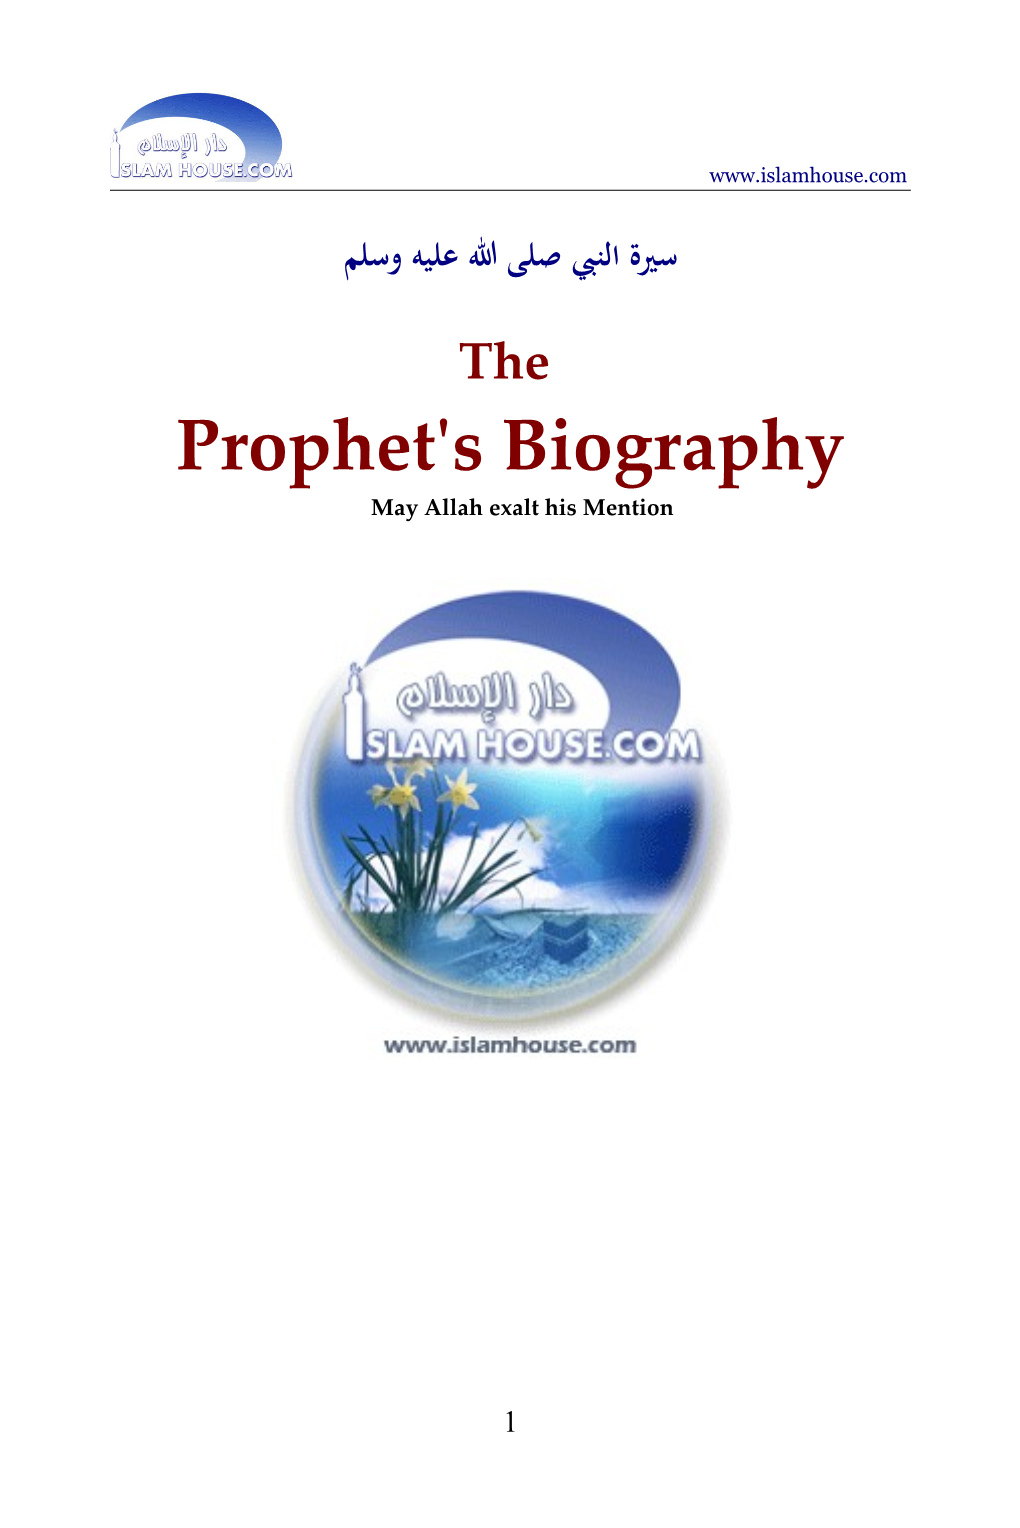 The Biography of the Prophet, May God Praise Him